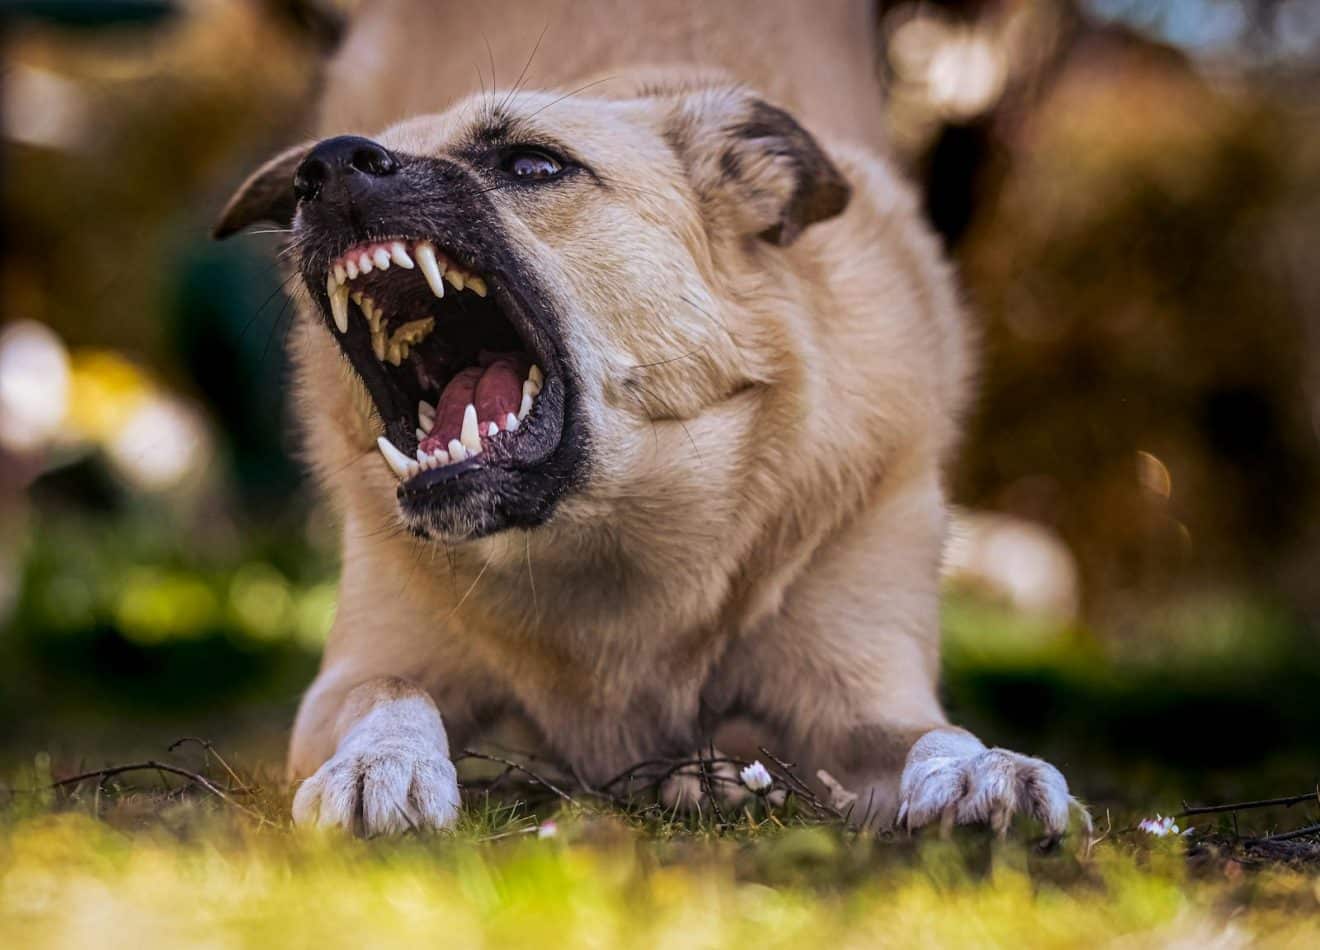 An Aggressive Dog with Sharp Teeth. Chien agressif attaque